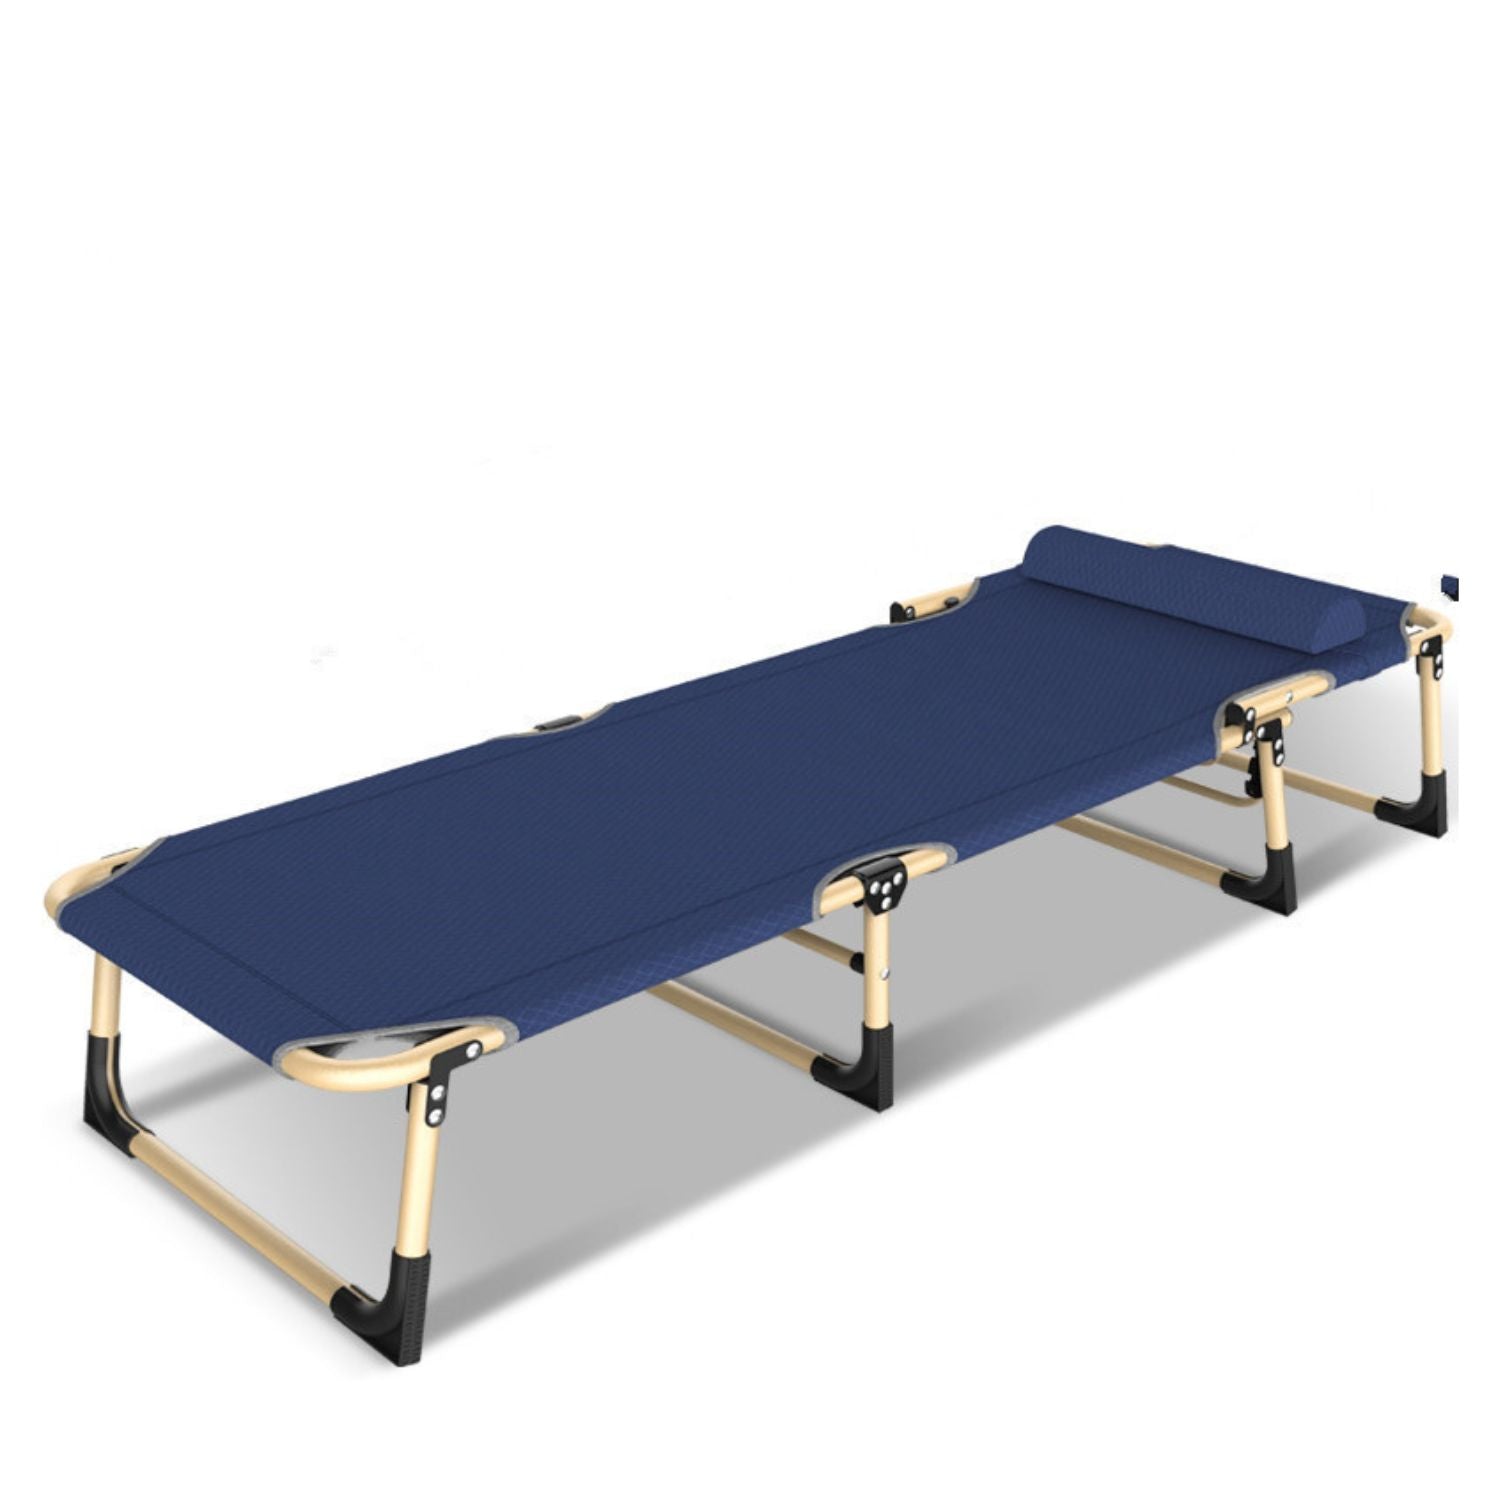 KILIROO Folding Camping Cot Bed 600D Oxford Fabric with Removable Pillow (Navy Blue)